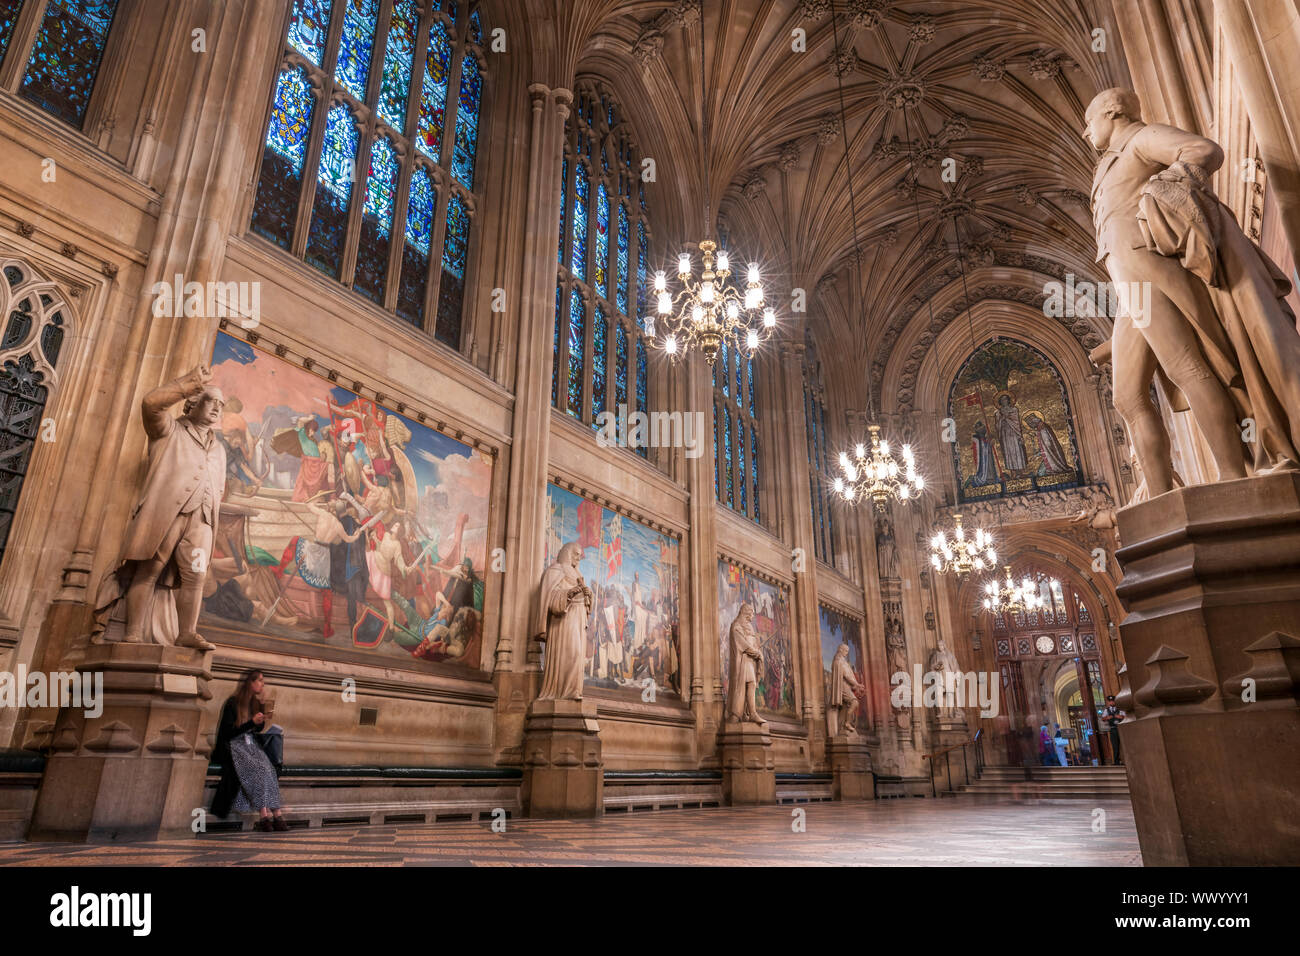 St Stephen's Hall in the Palace of Westminster stands on the site of the royal Chapel of St Stephen's. The House of Commons sat in the hall up until t Stock Photo